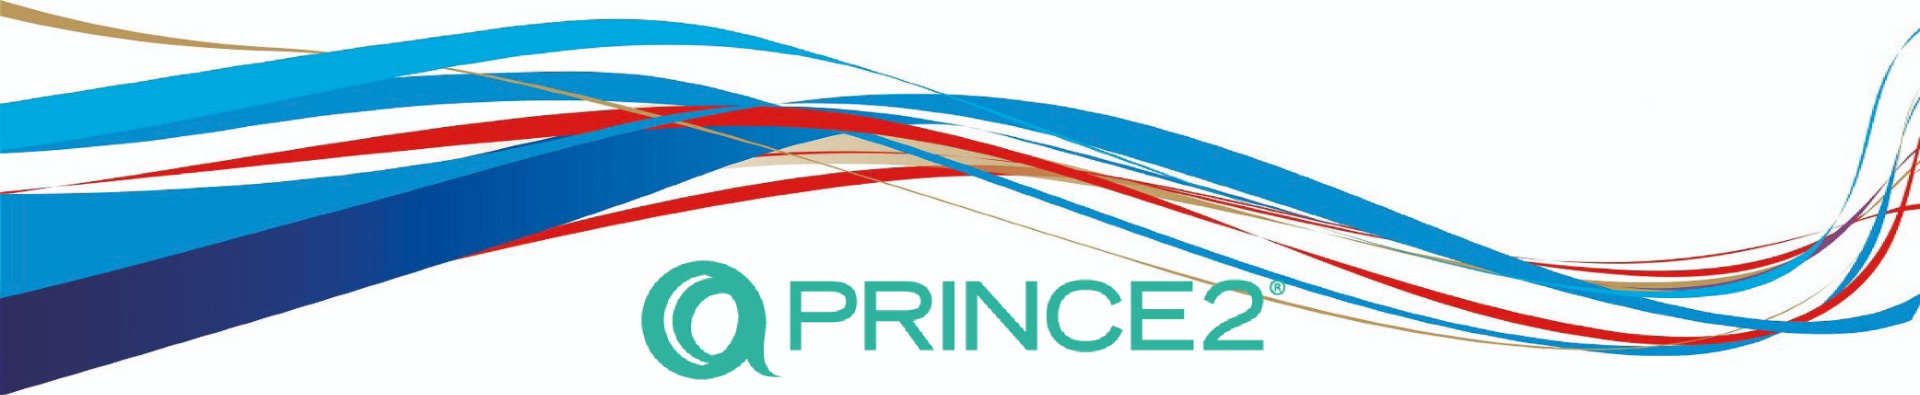 Prince 2 Exams Only, PRINCE2 Exam Cost and Plus Packages